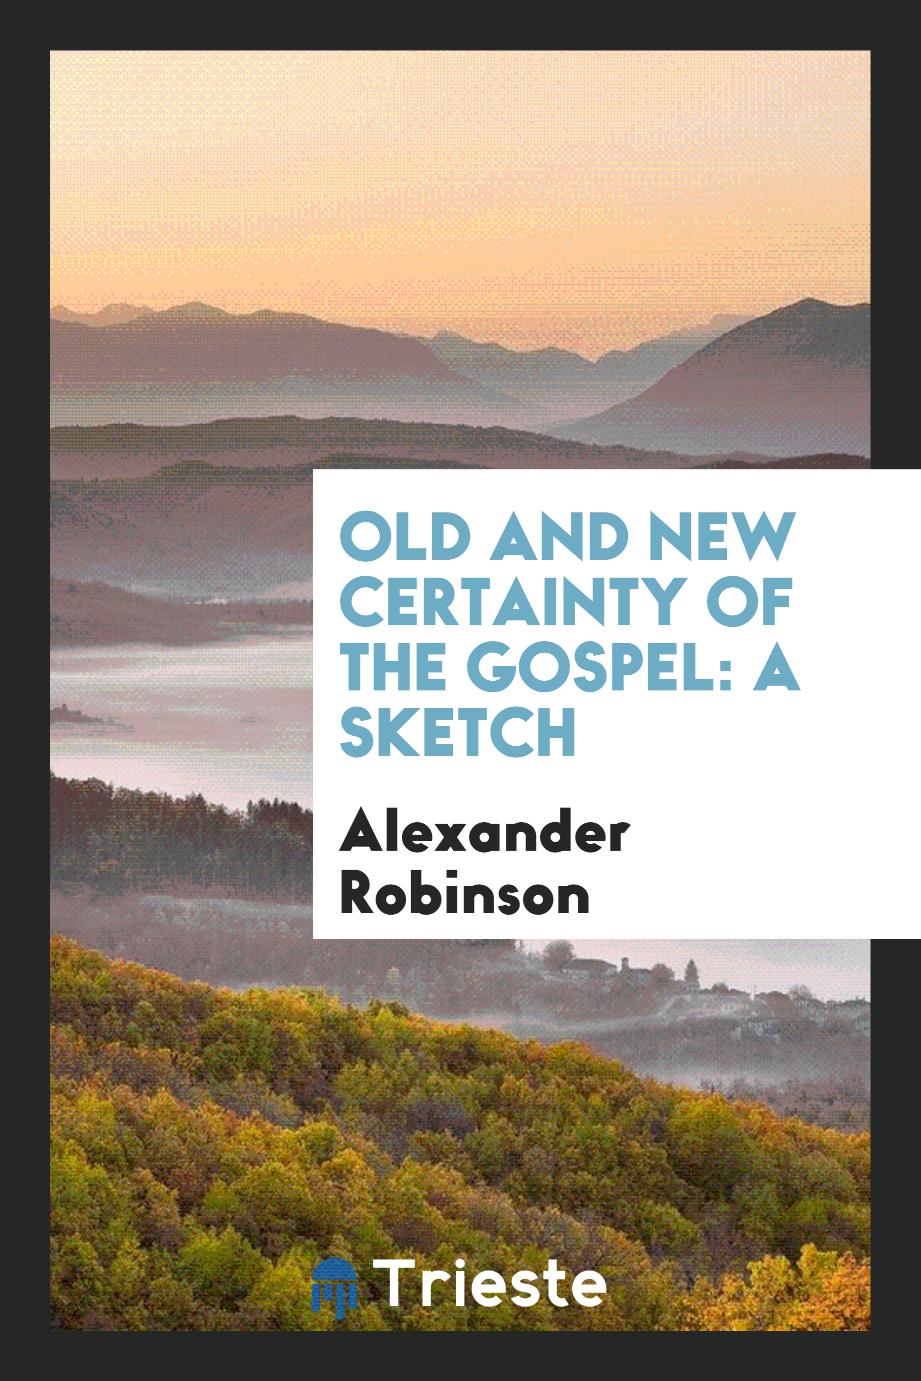 Old and New Certainty of the Gospel: A Sketch